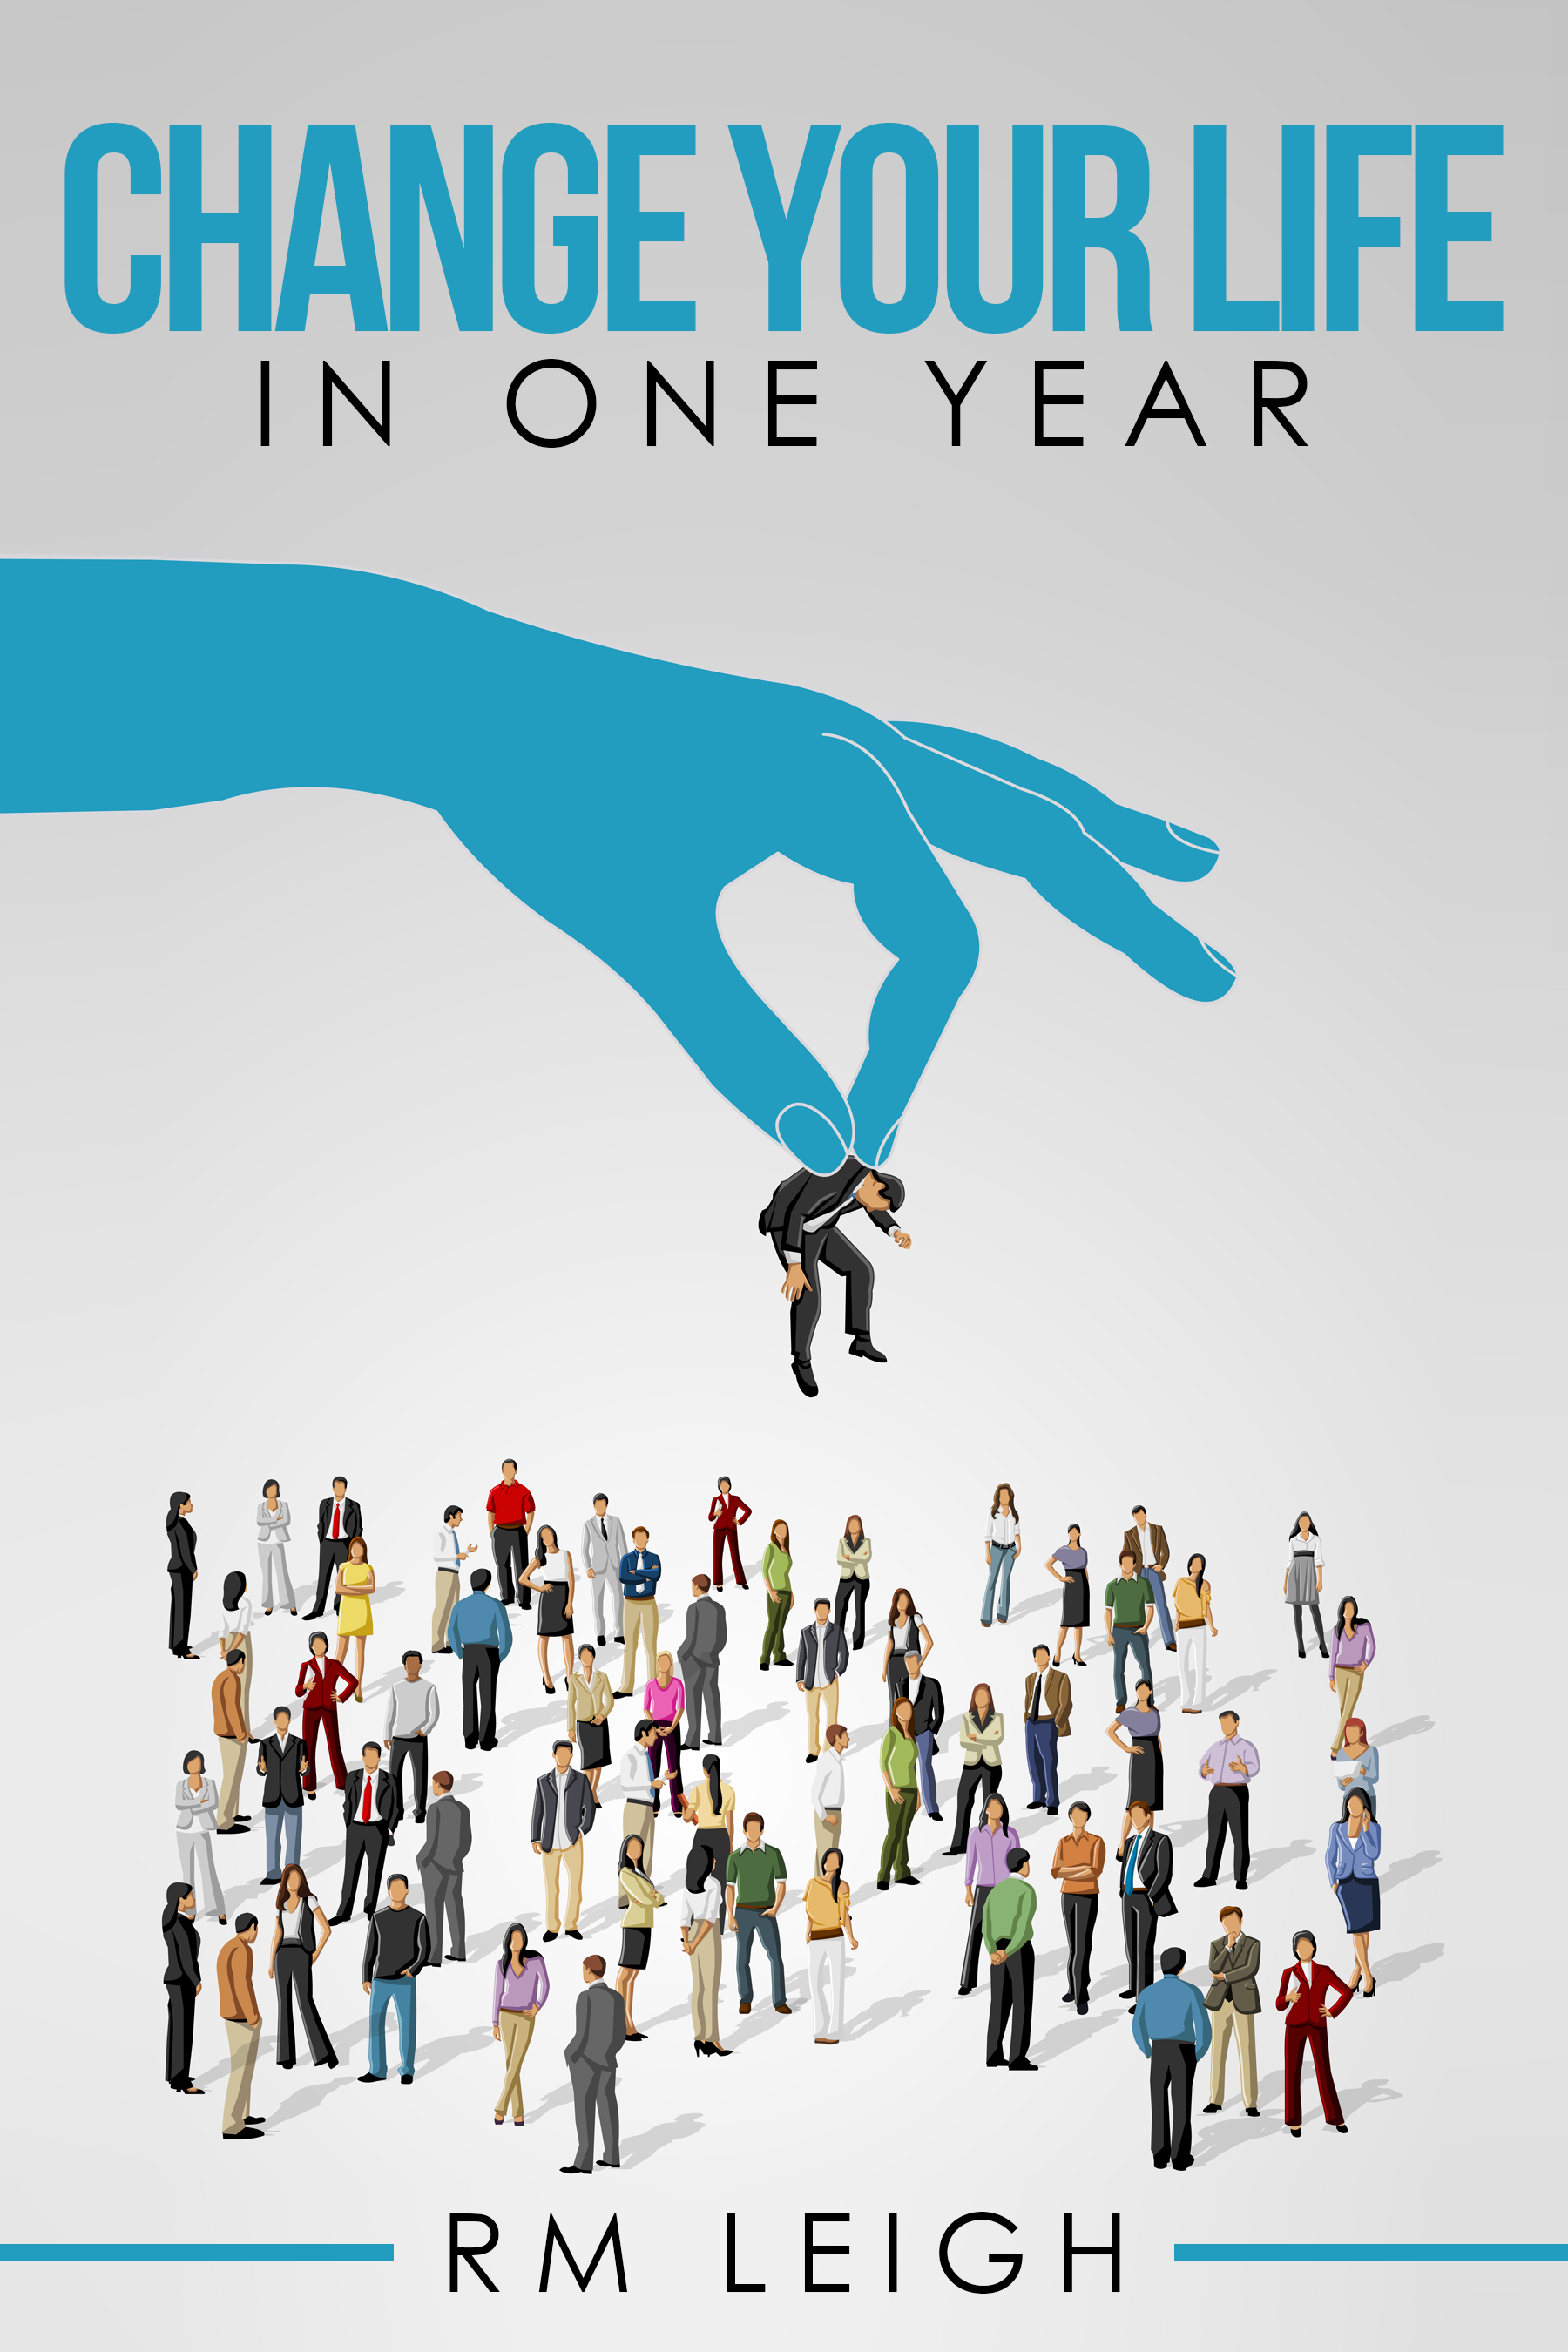 FREE: Change your life in one year by RM LEIGH